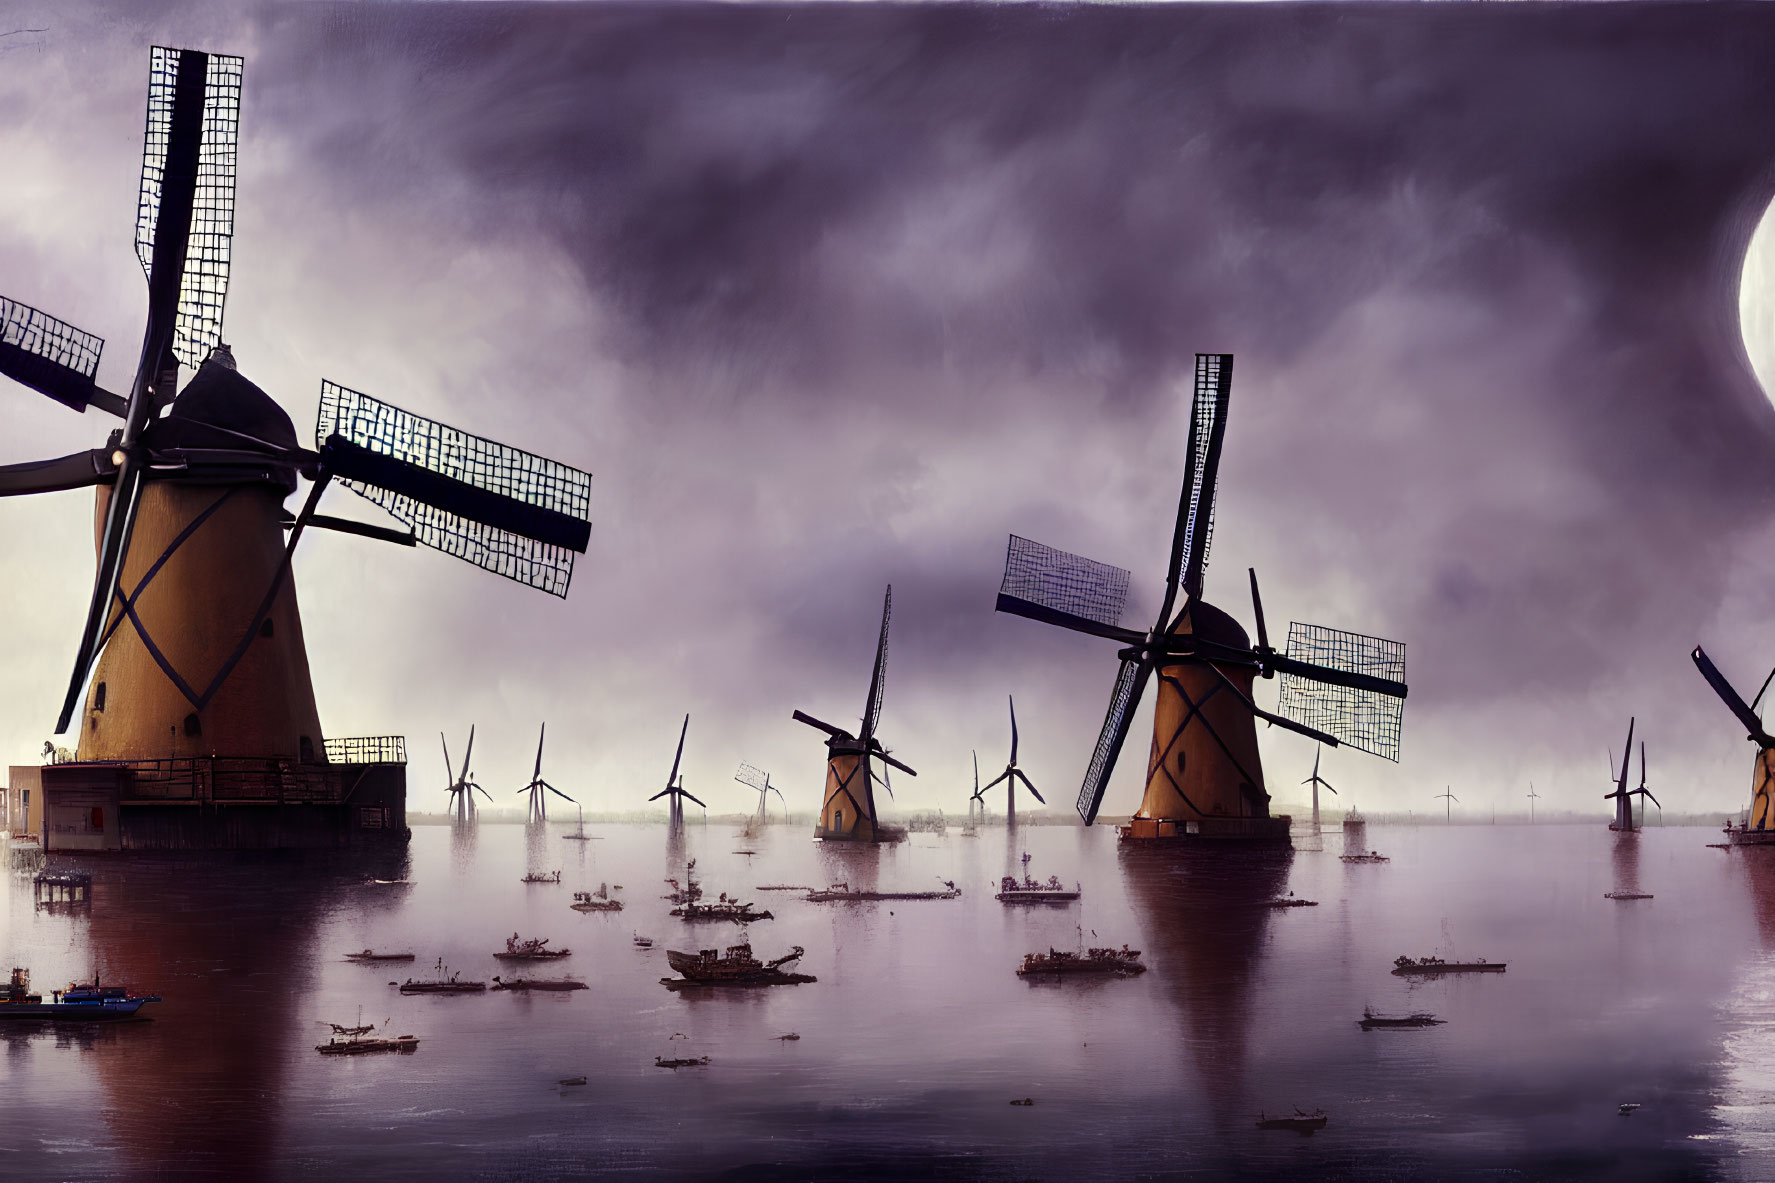 Windmills in flooded landscape with boats under dramatic sky and oversized moon